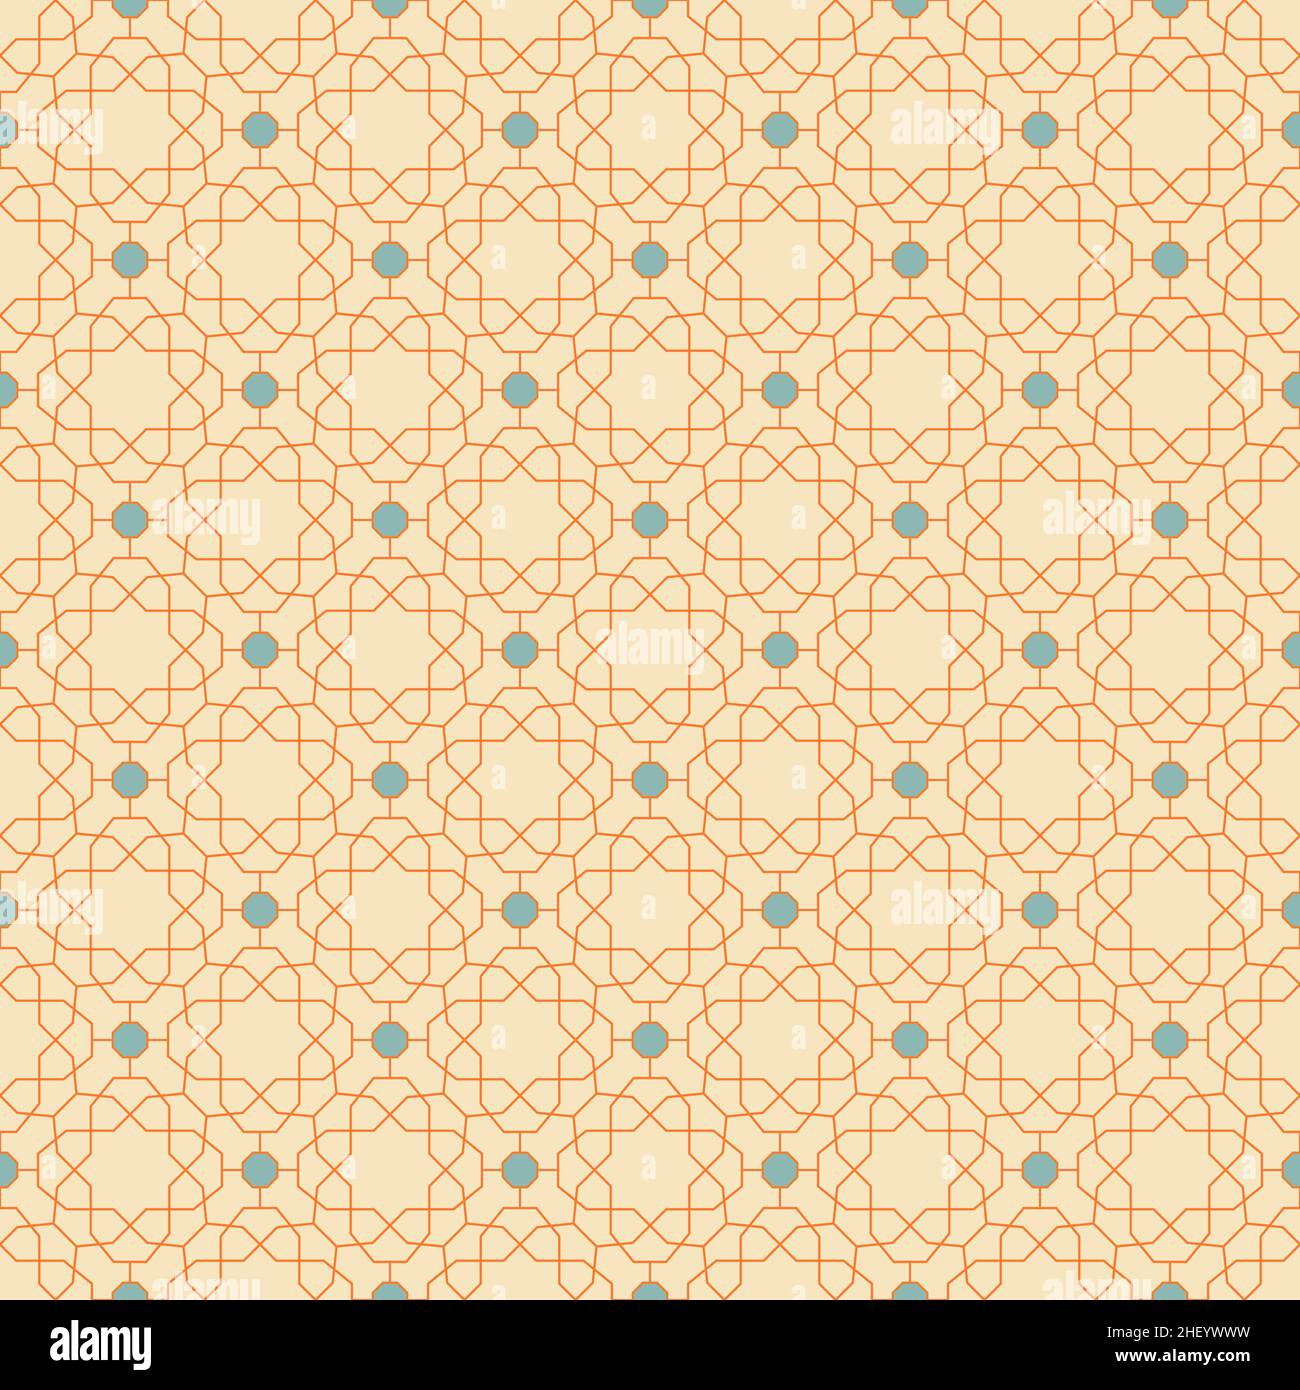 Blue Vector Geometric Texture. Abstract Seamless Pattern With Small Diamond  Shapes, Stars, Rhombuses, Flowers. Subtle Minimal Colorful Background.  Repeat Design For Prints, Decor, Fabric, Linens, Wrap Royalty Free SVG,  Cliparts, Vectors, and